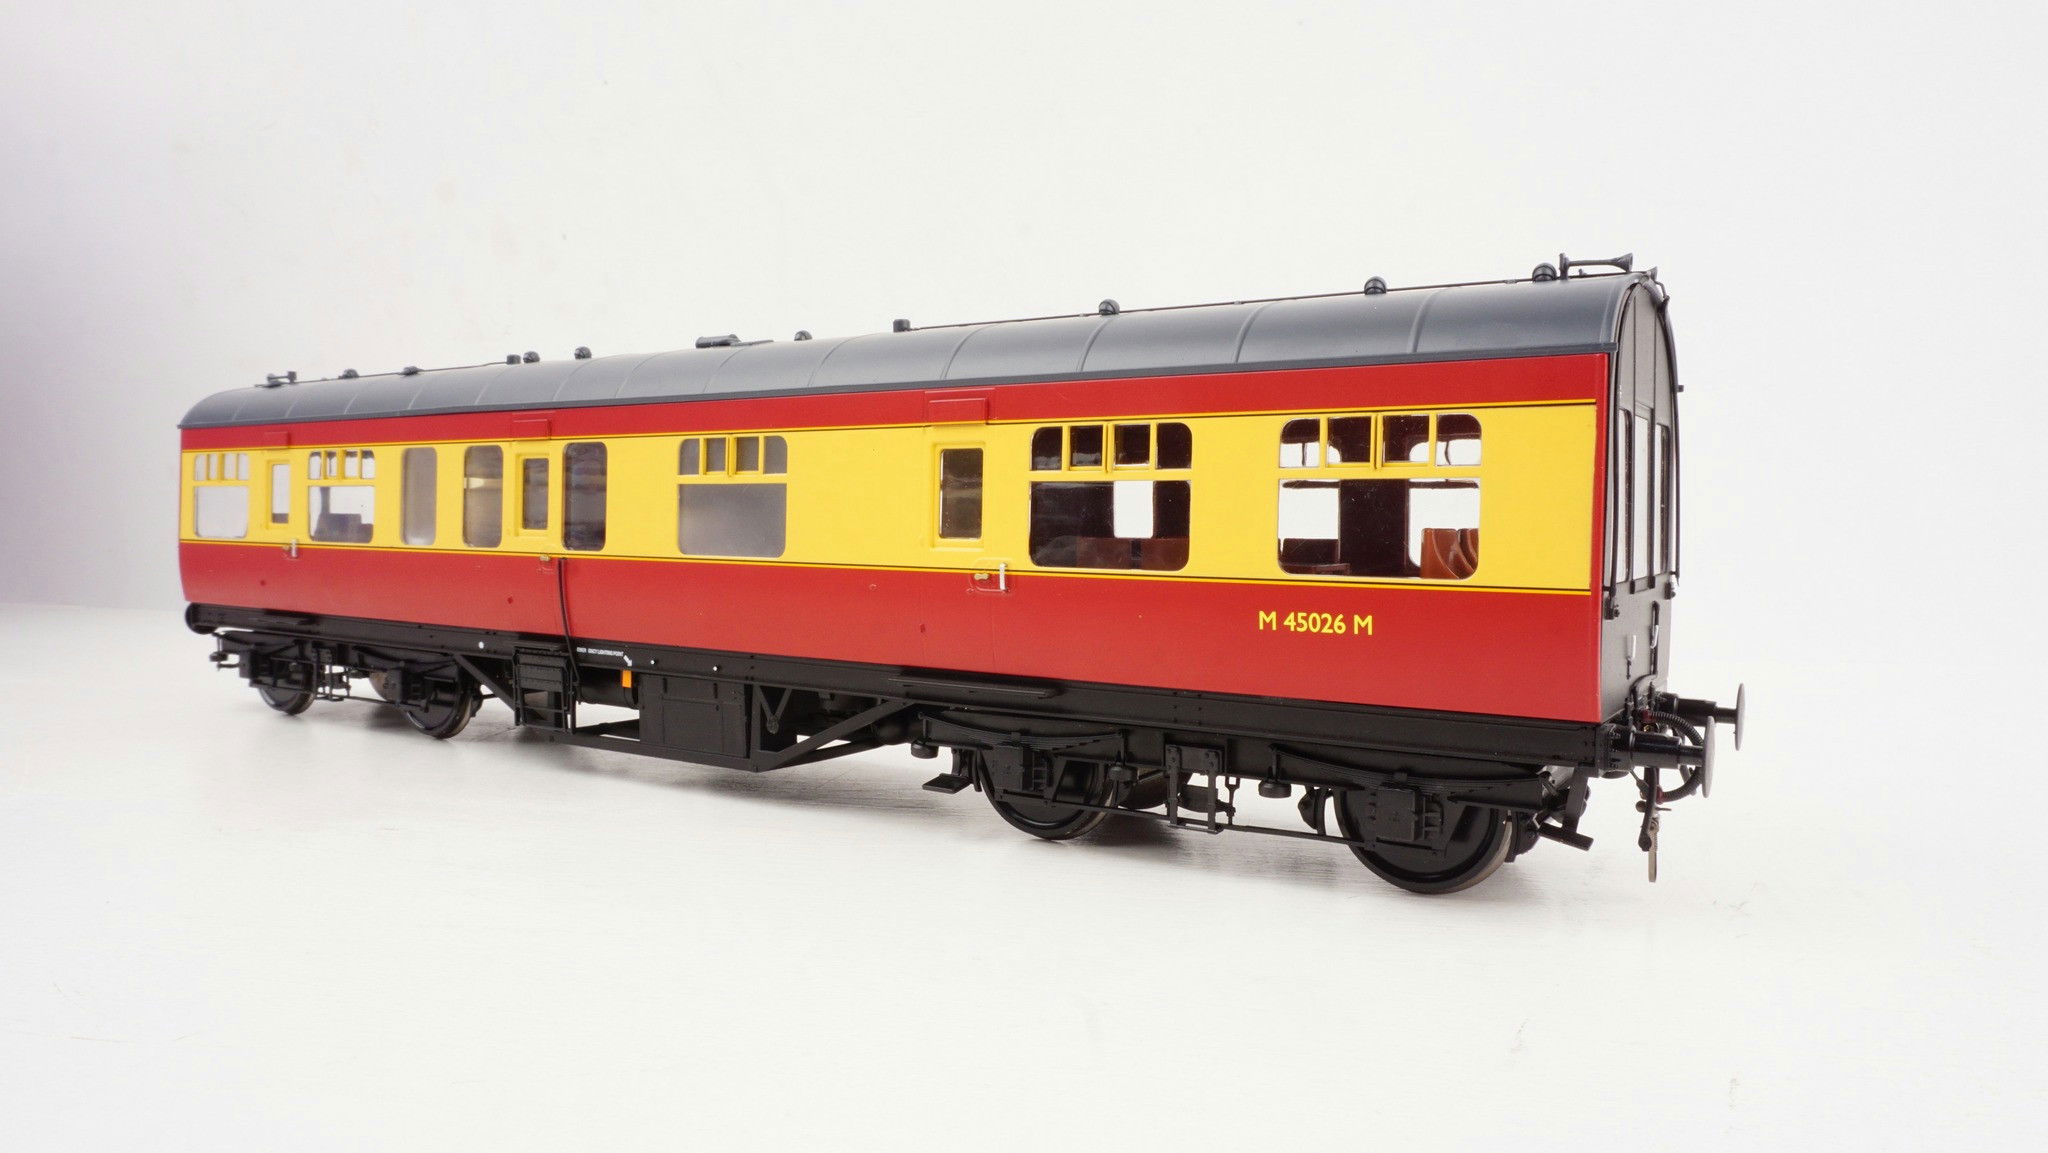 Decorated samples of the LMS inspection saloon have arrived.